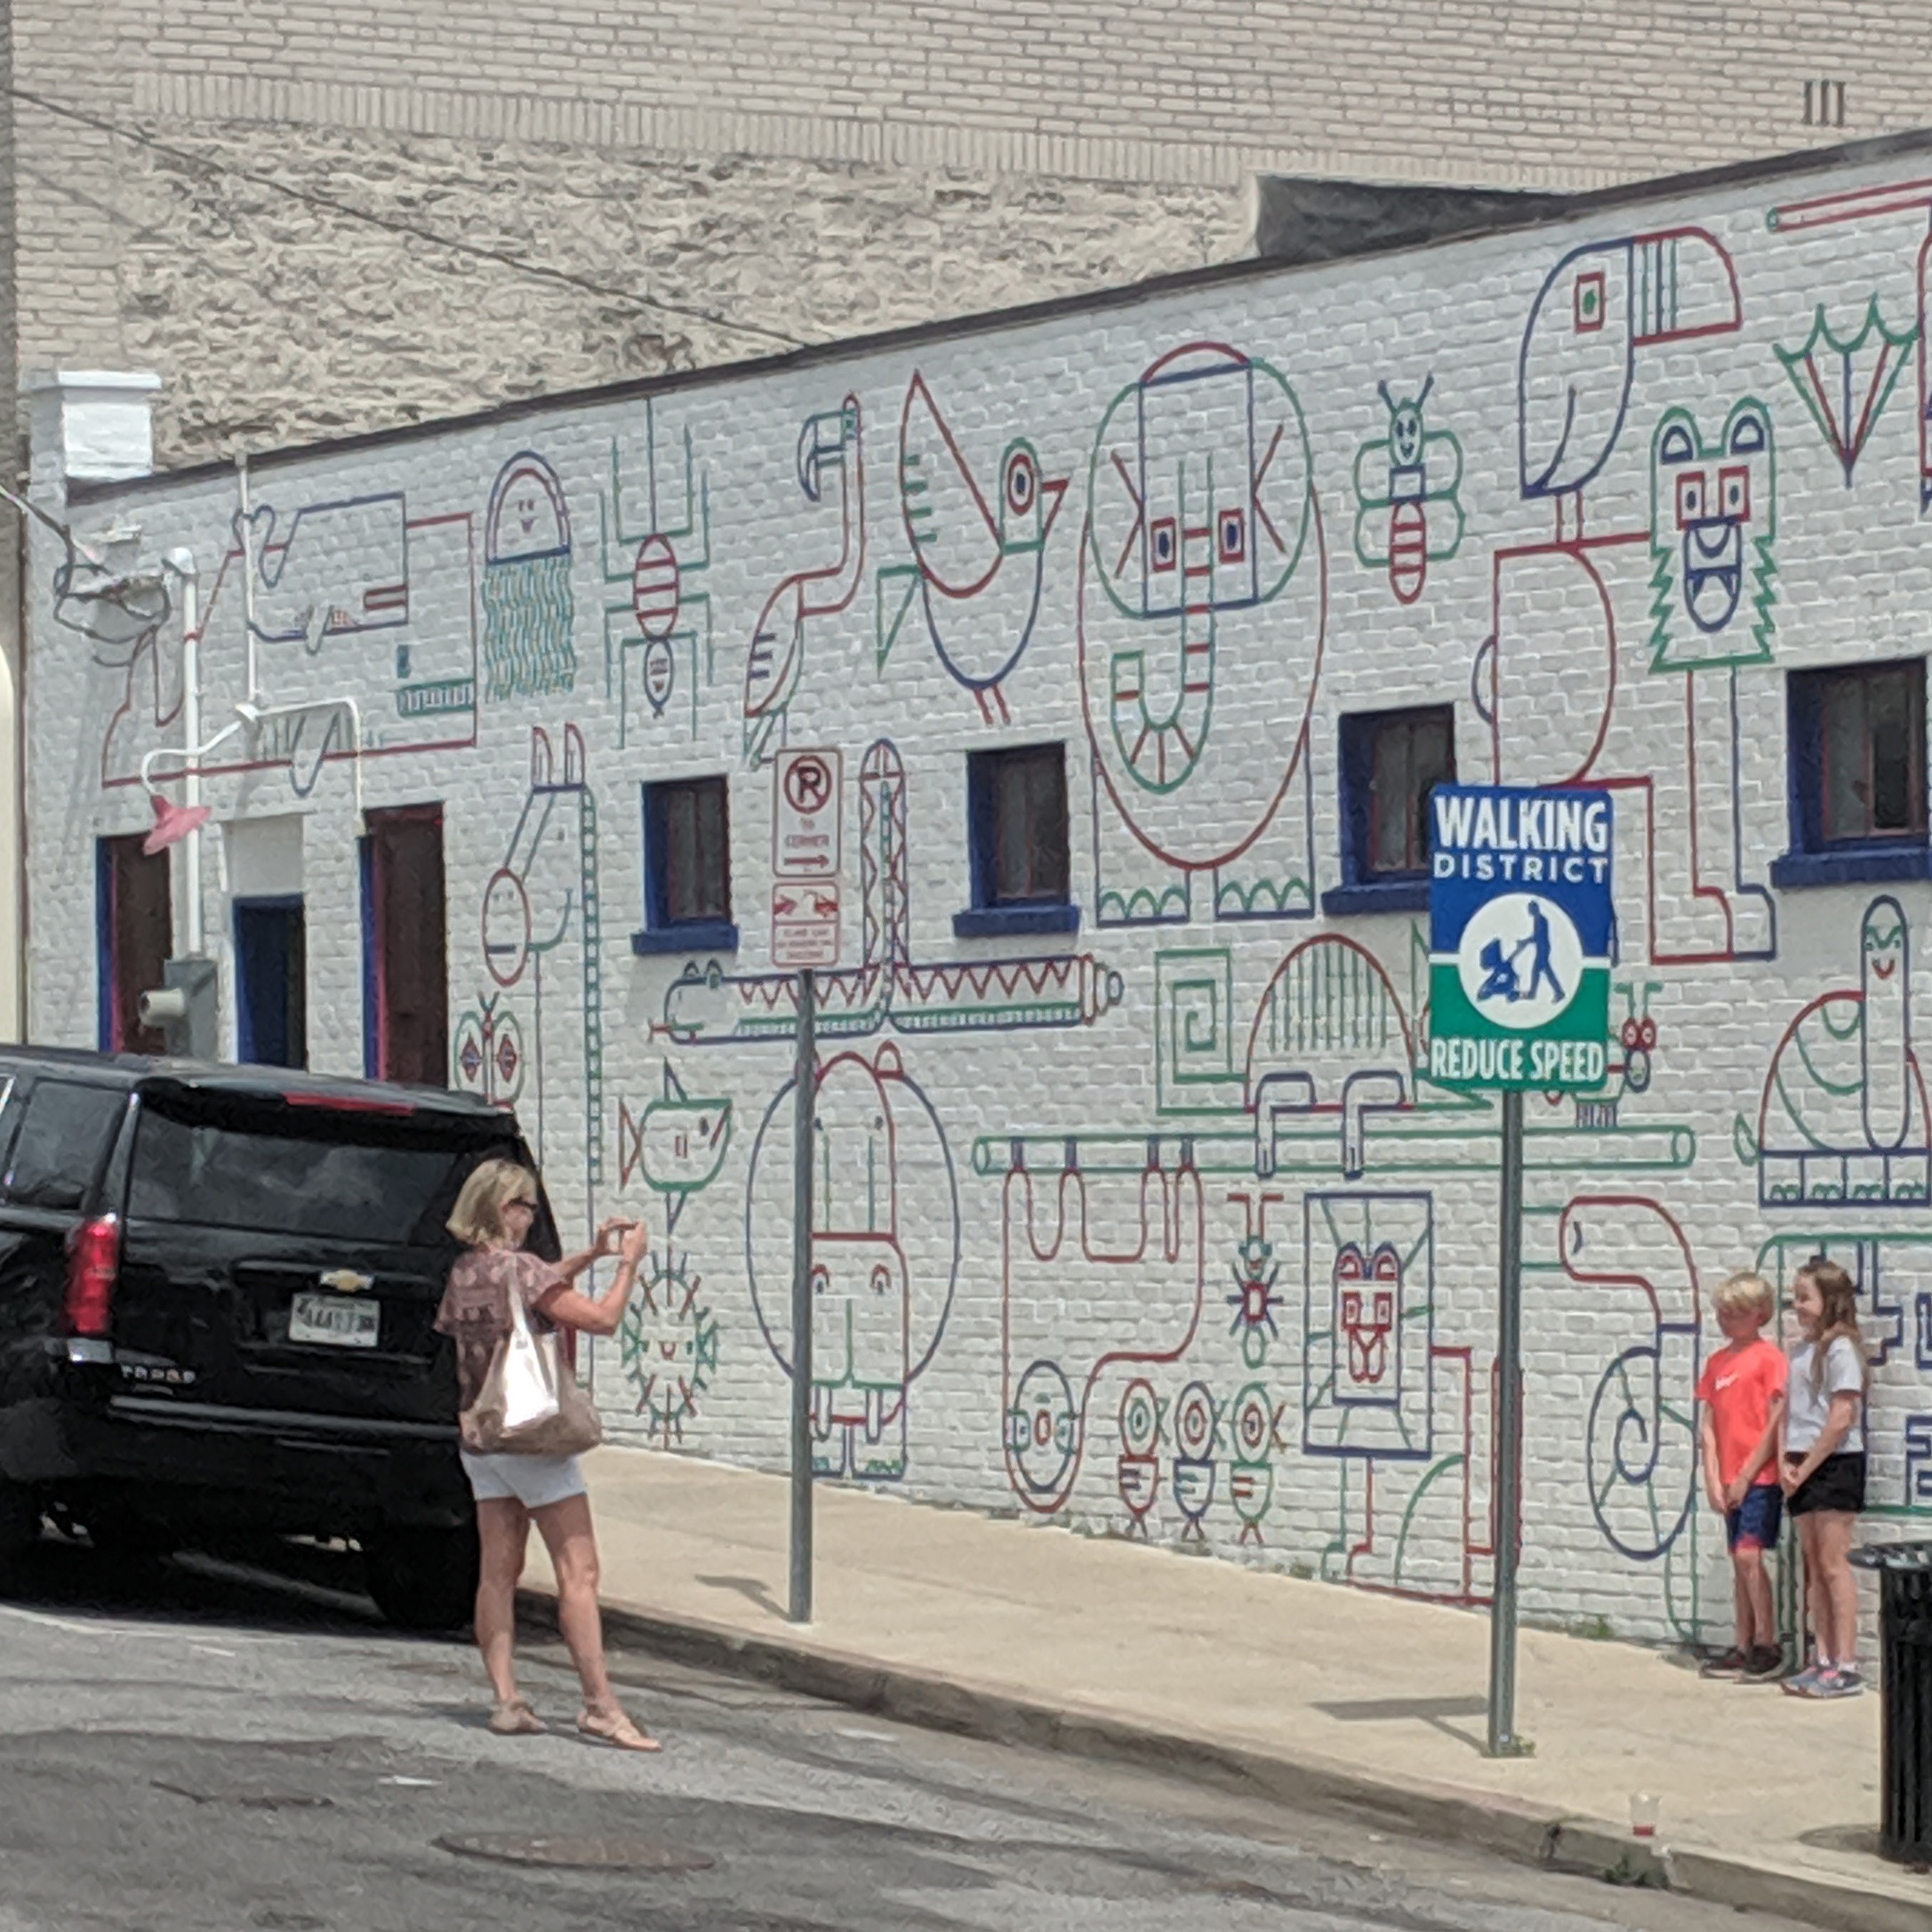 A beautiful street mural I came across in Nashville, Tennessee.